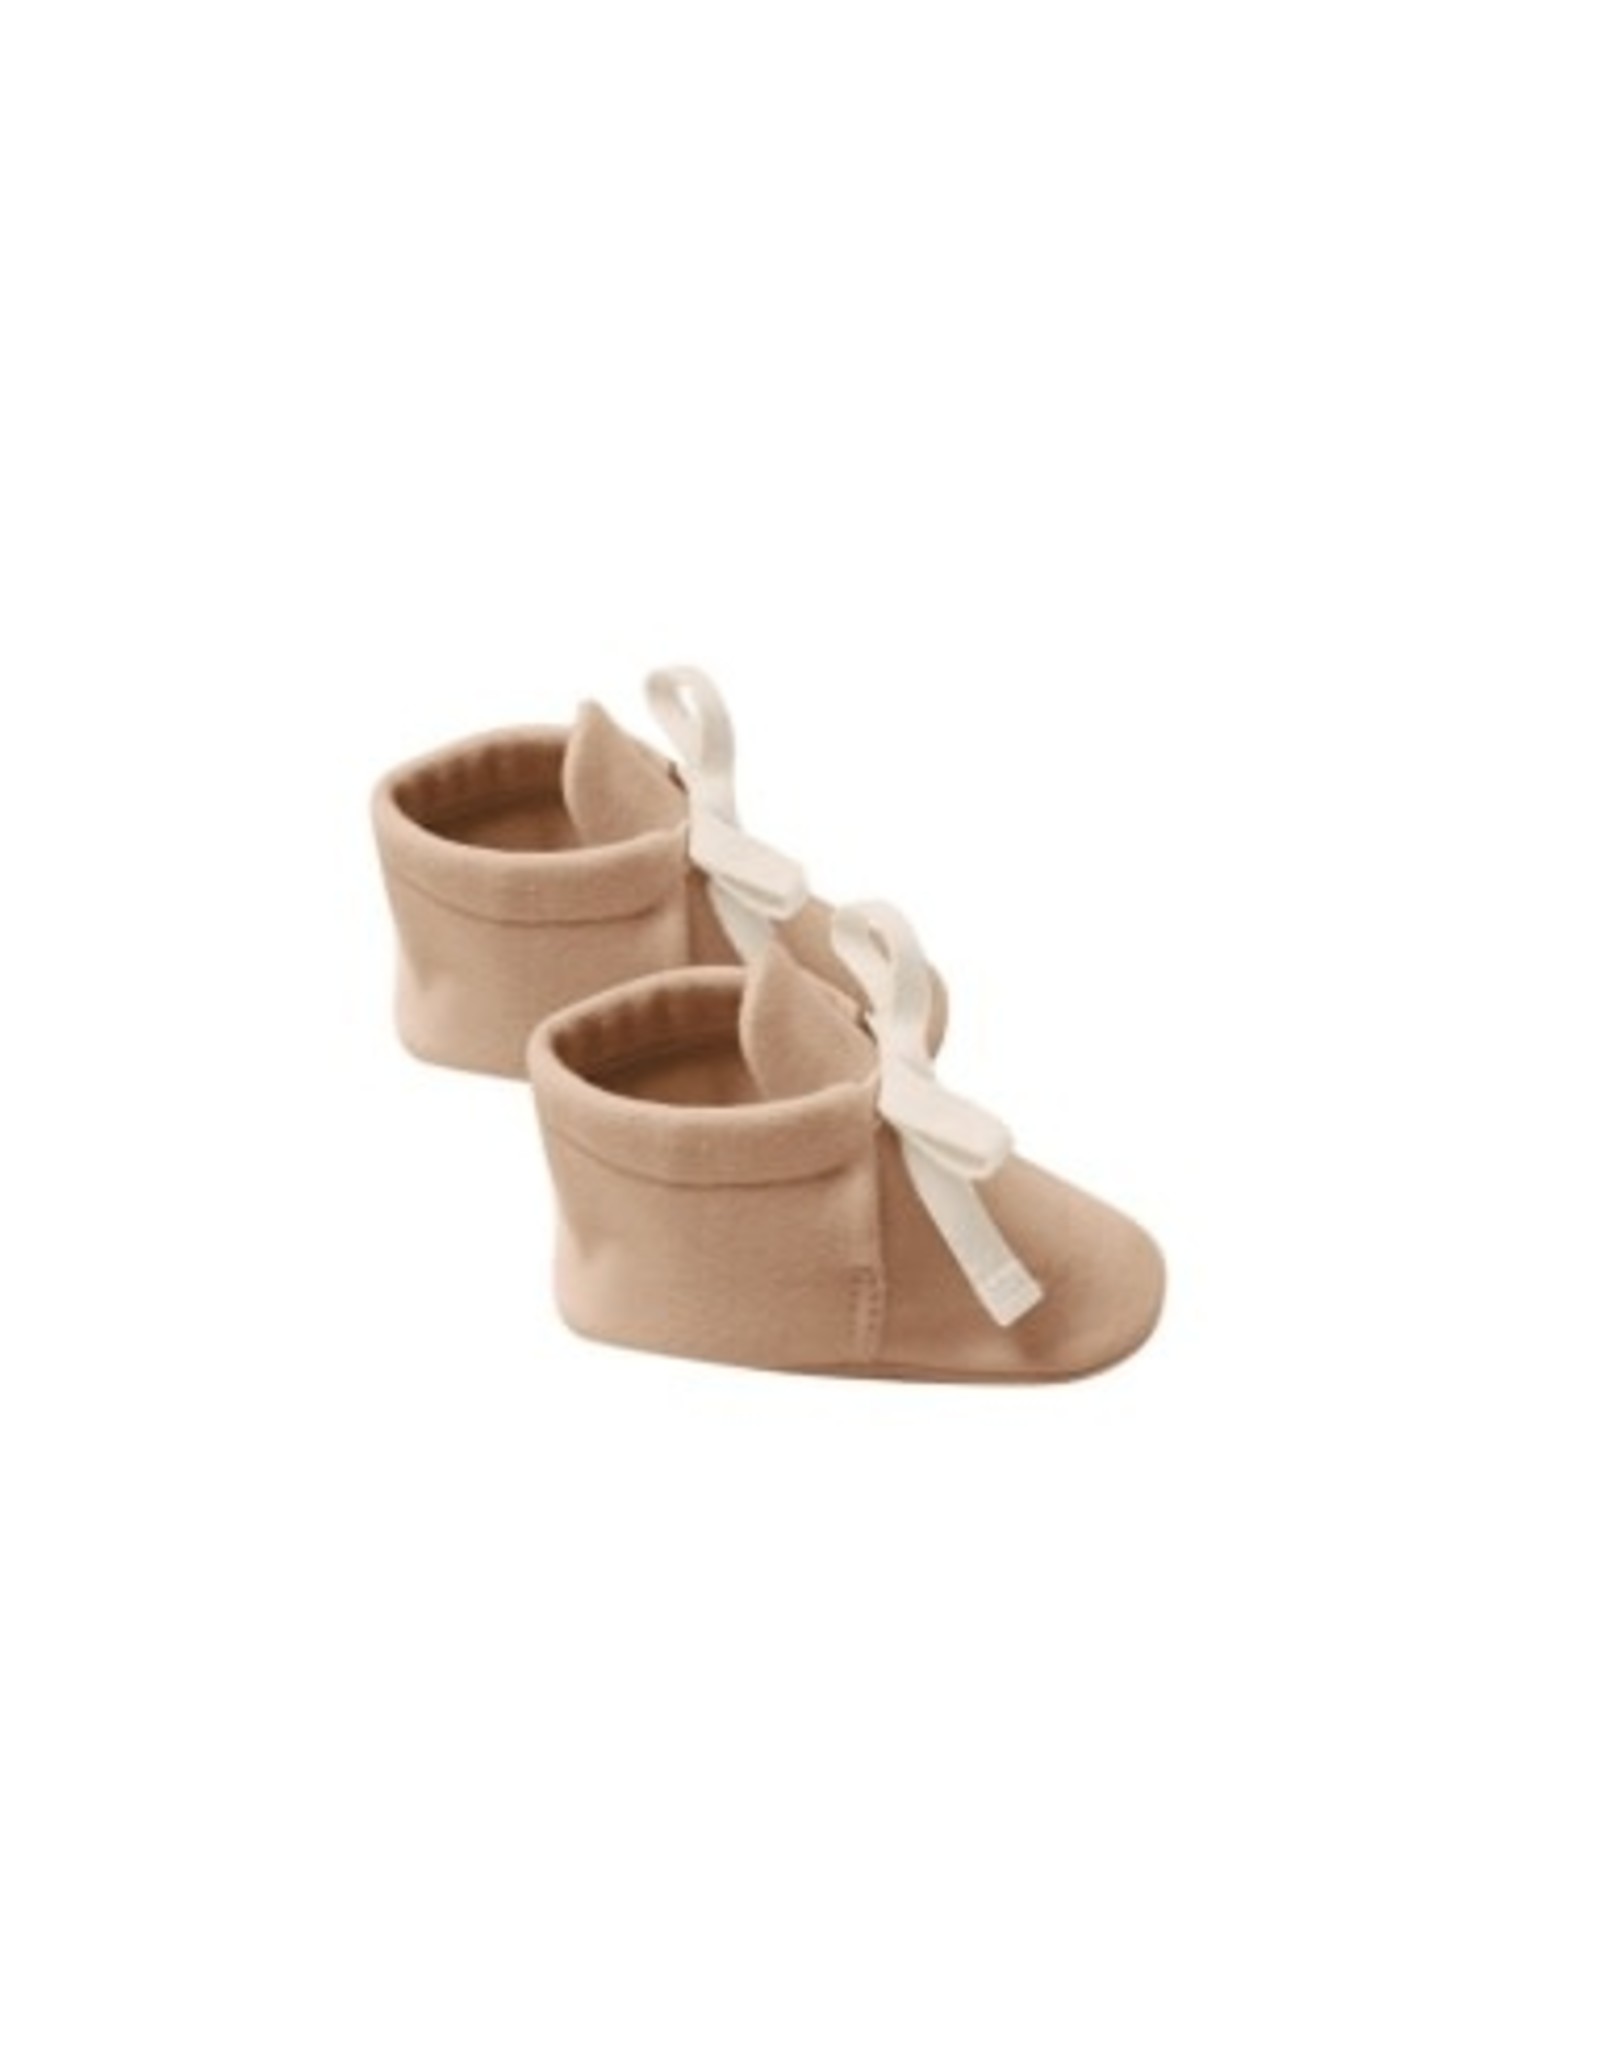 Quincy Mae BABY BOOTIES | APRICOT